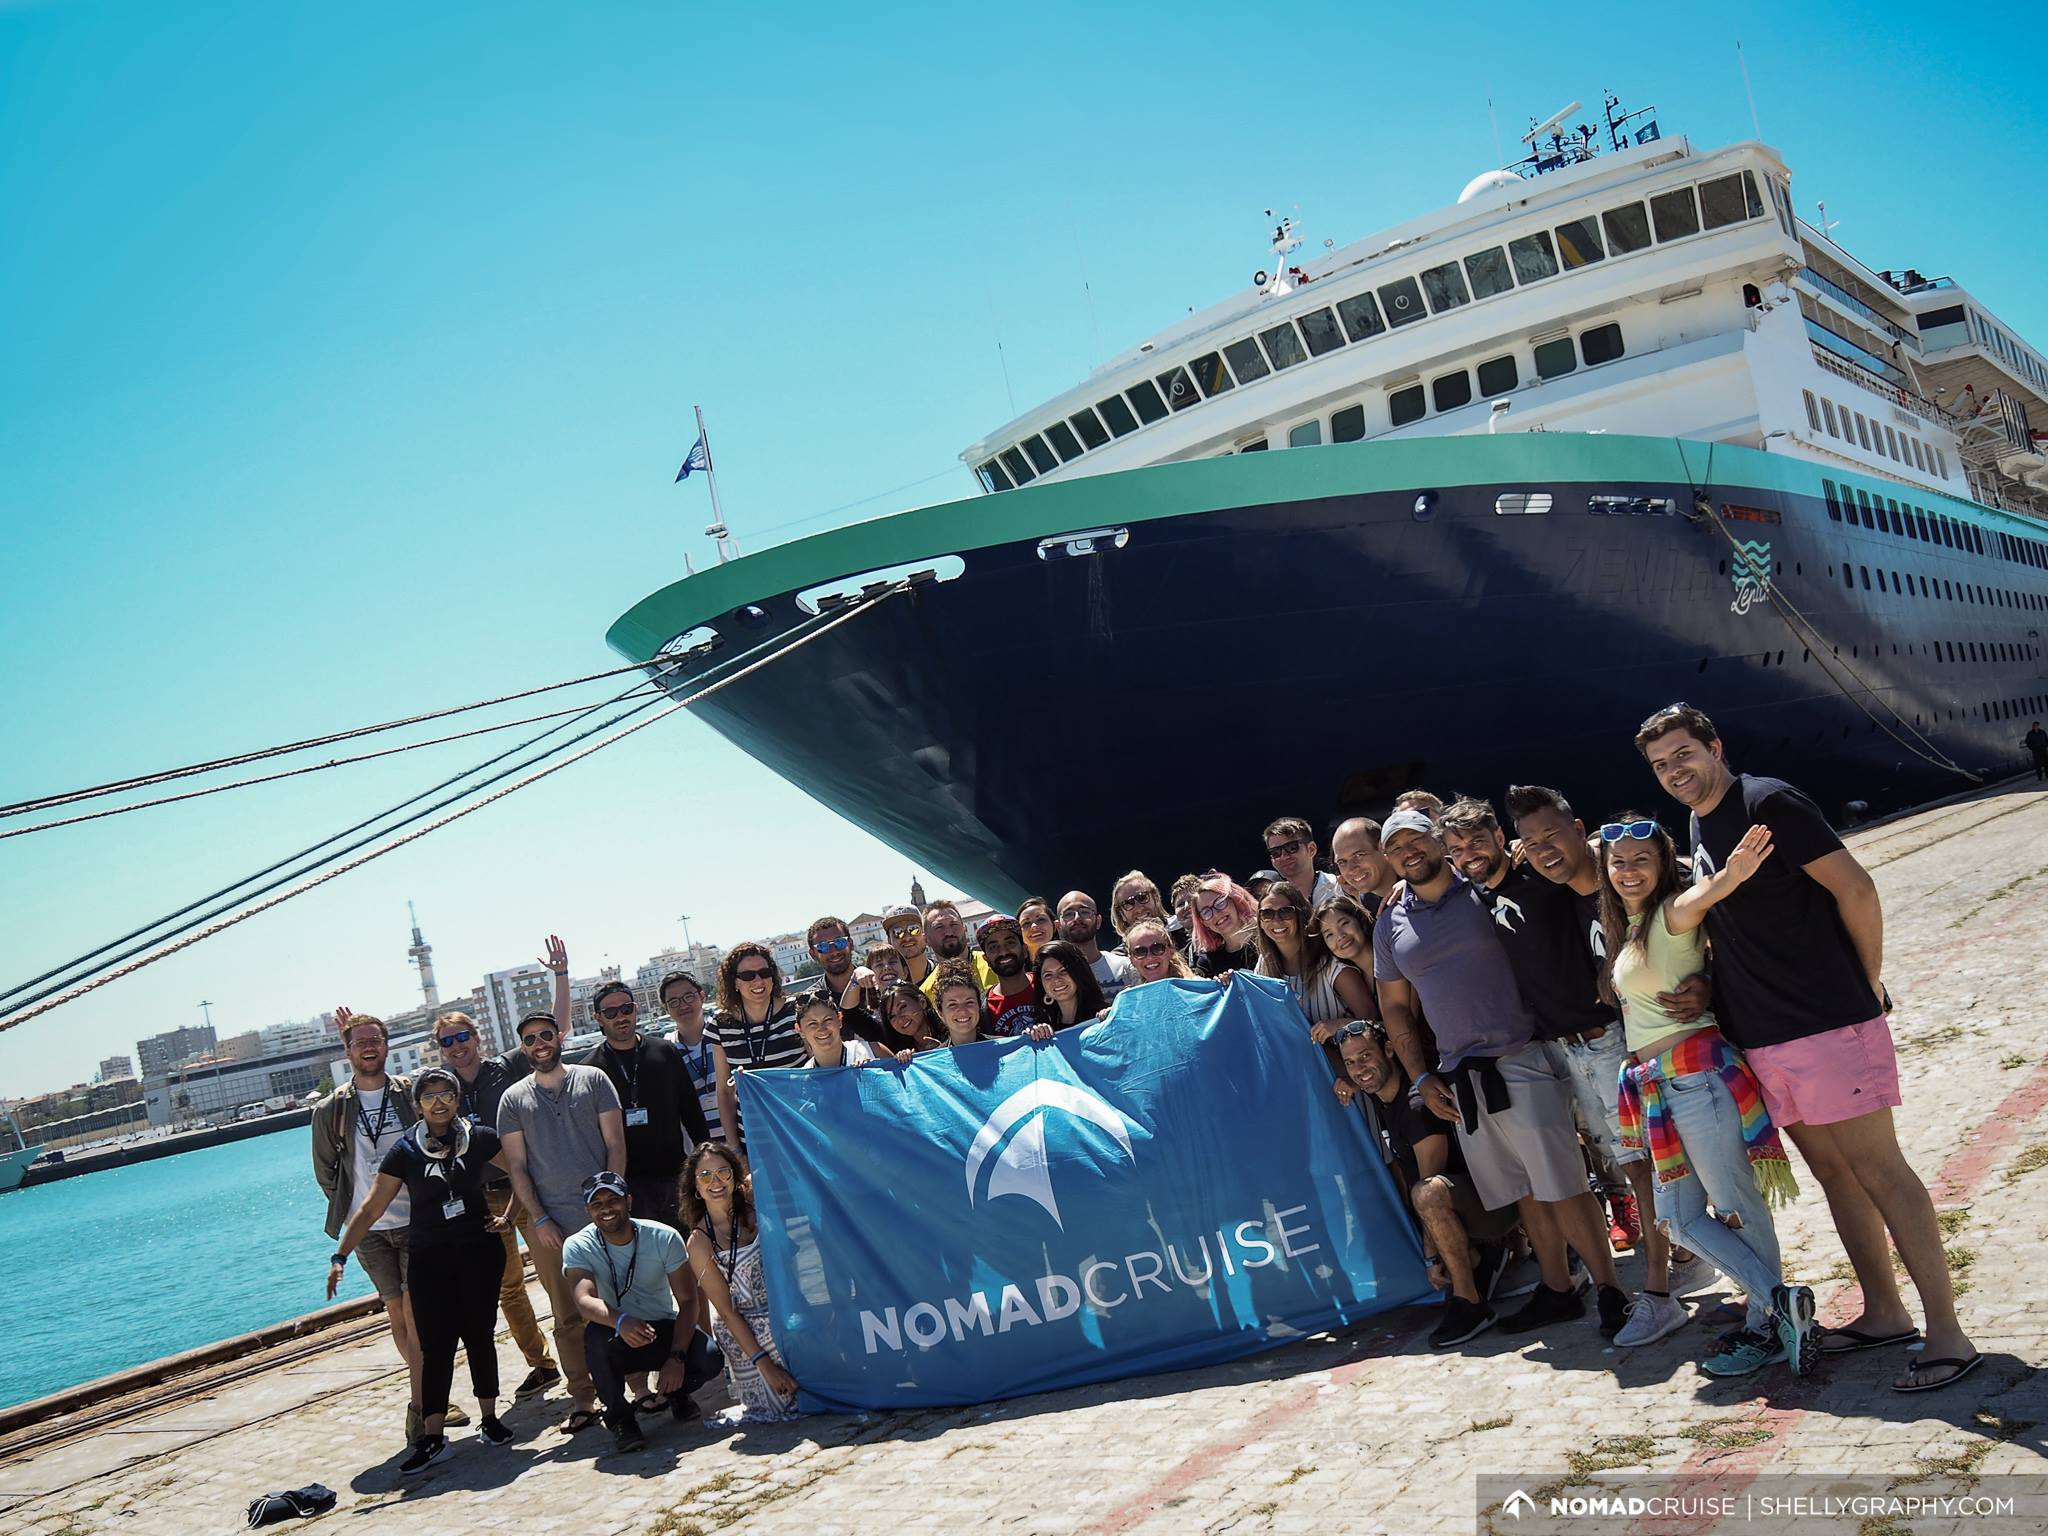 a group of people posing for a photo in front of a large ship